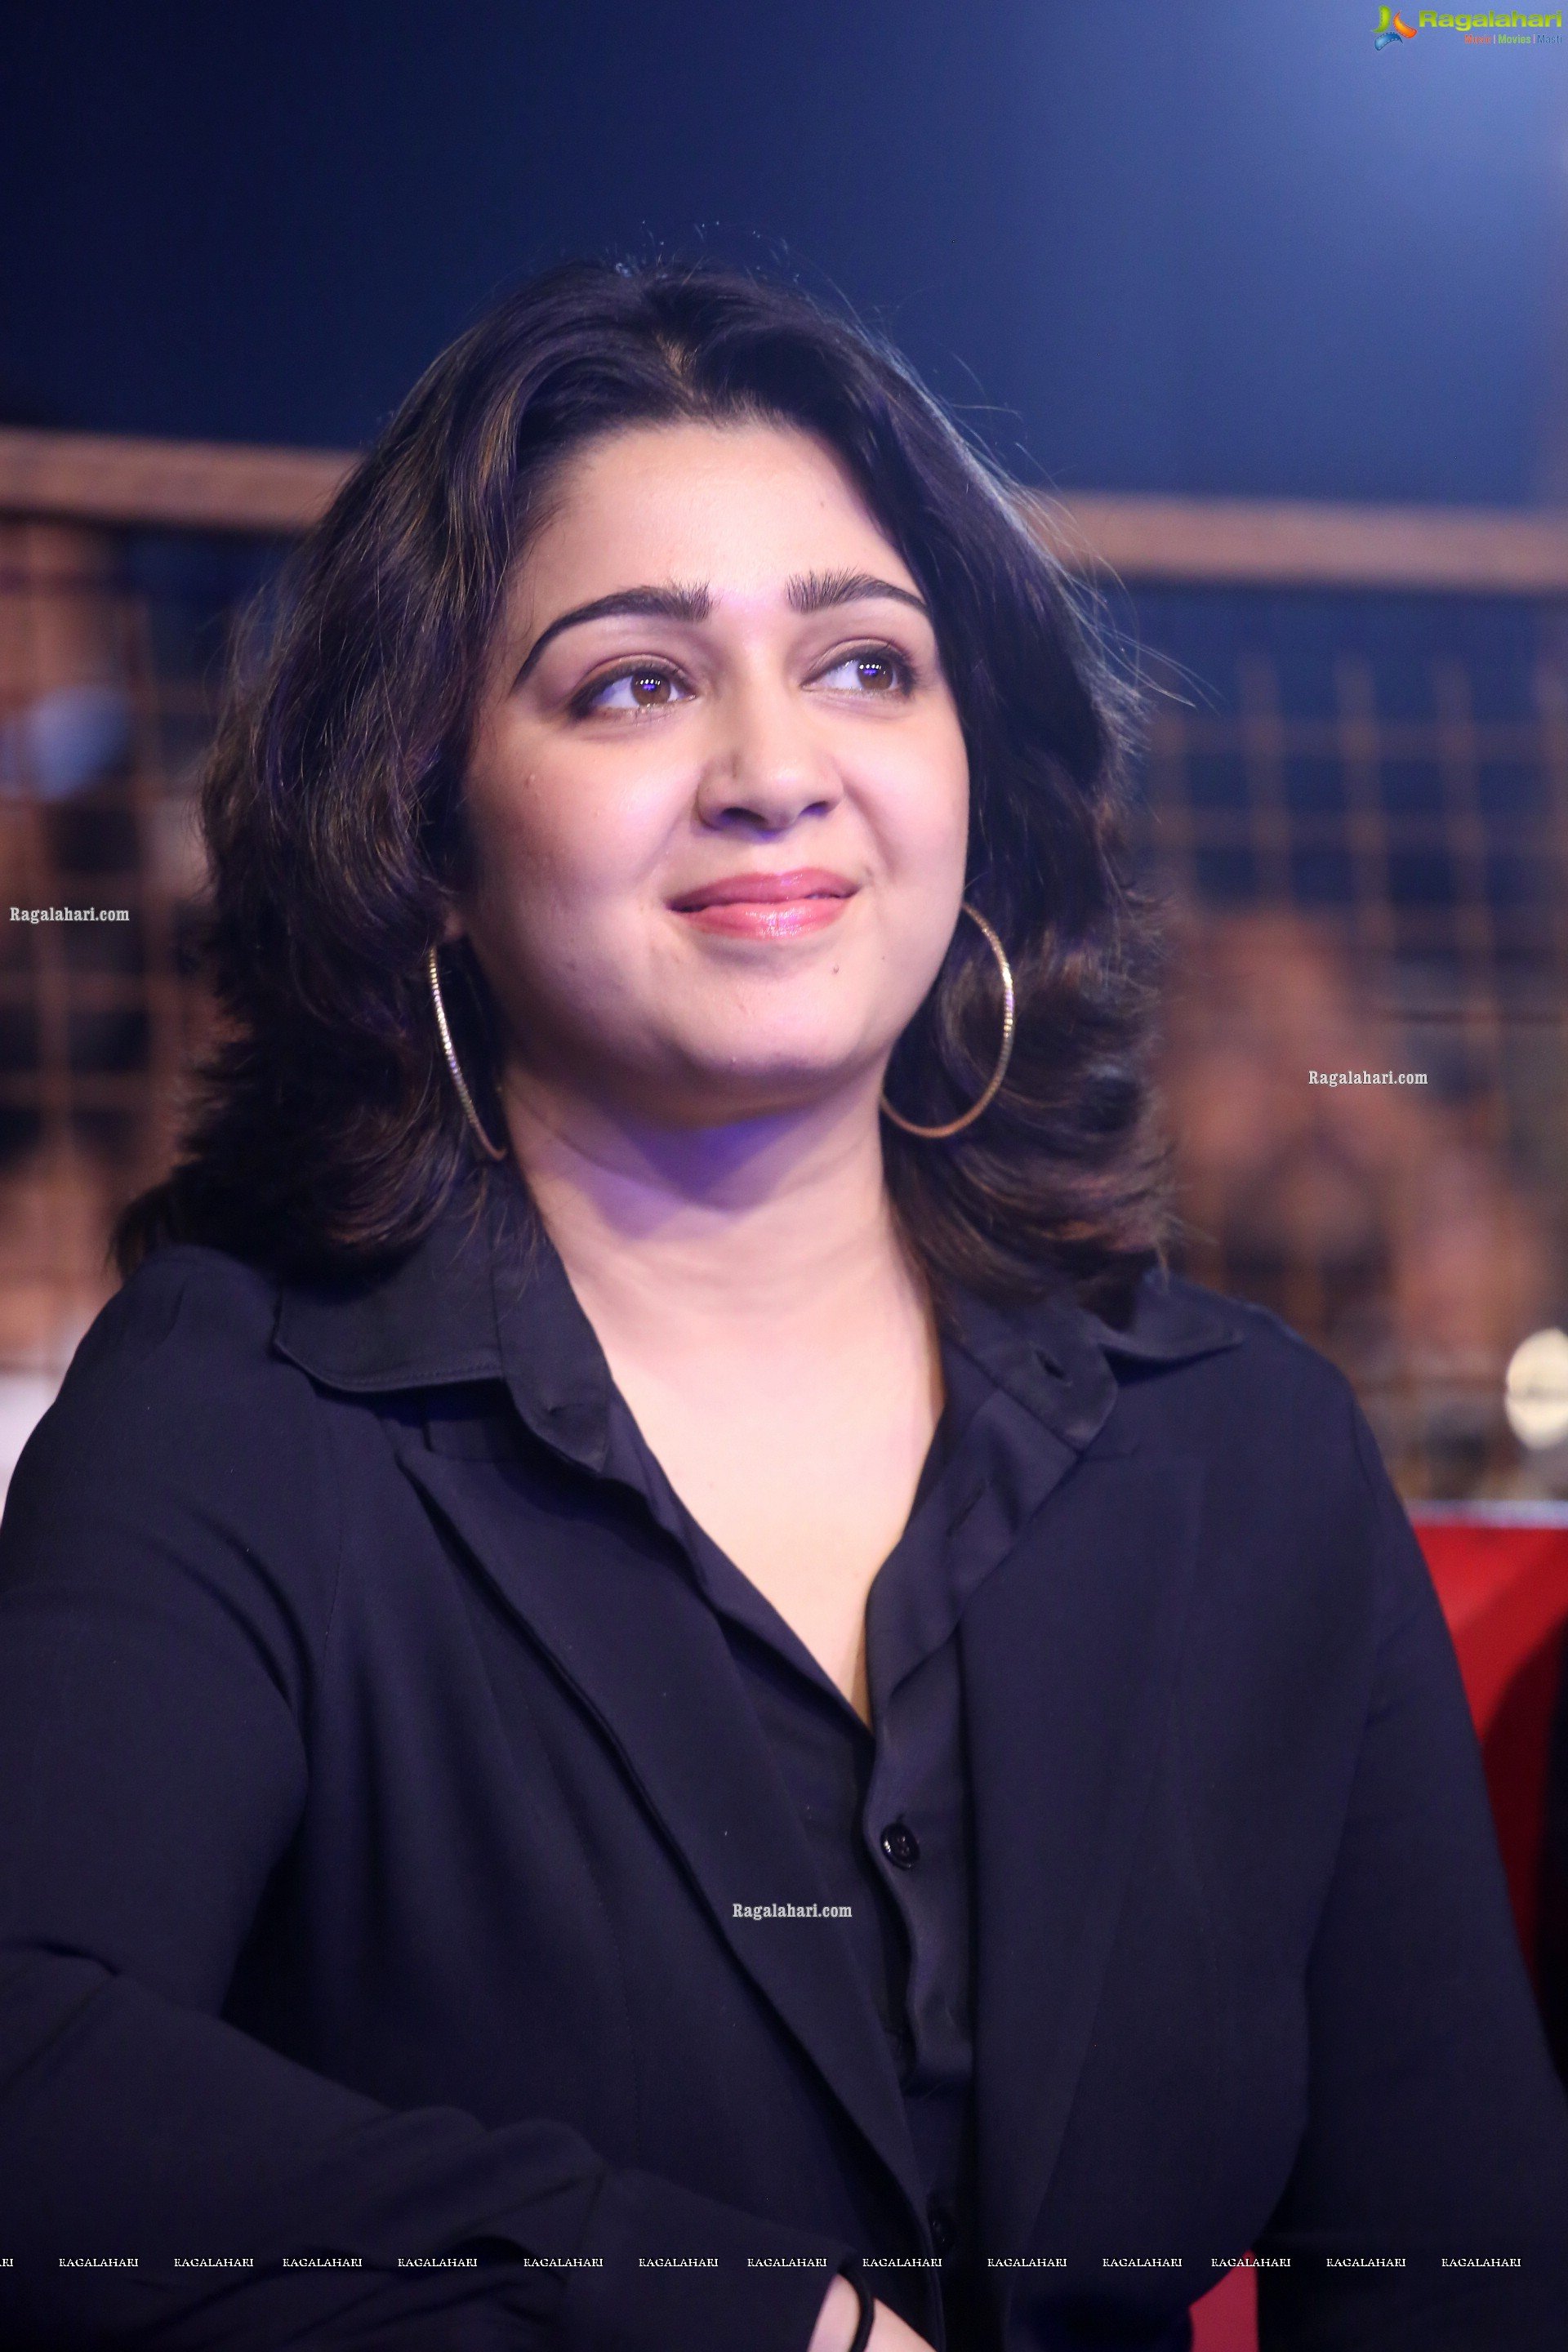 Charmme Kaur at Romantic Movie Pre-Release Event, HD Photo Gallery